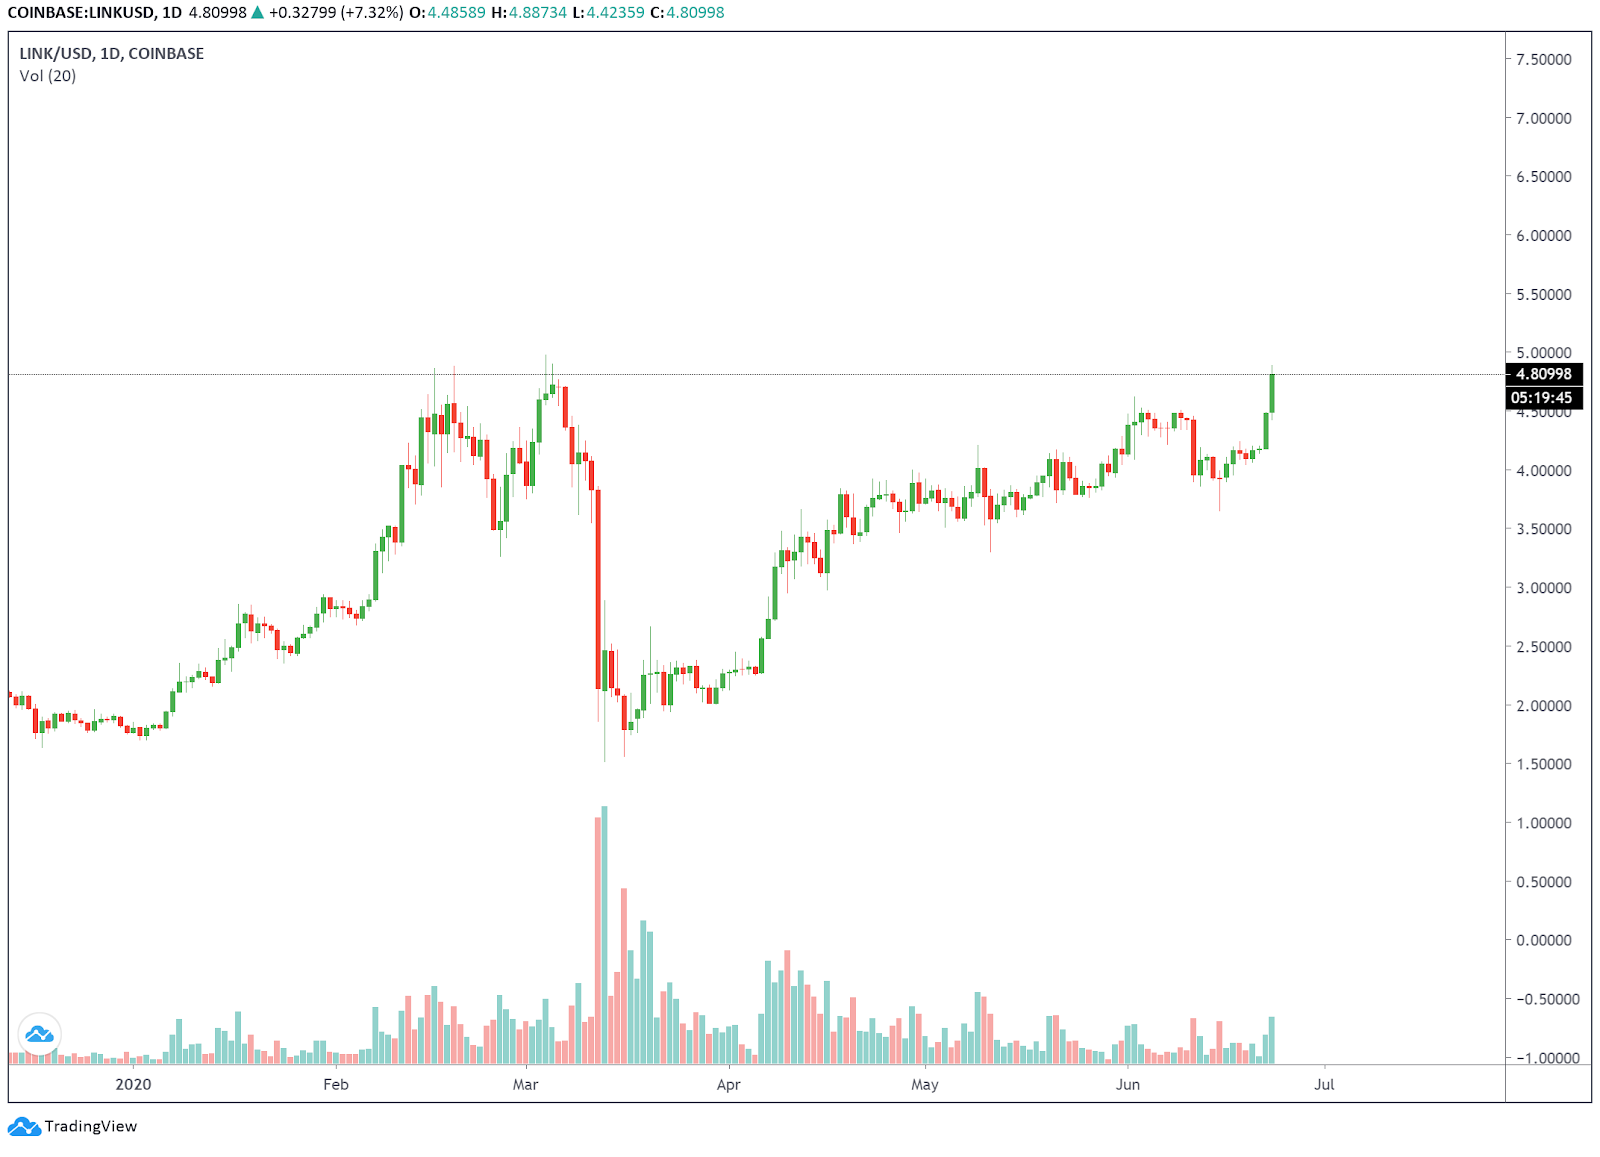 LINK/USD 1-day chart. Source: TradingView